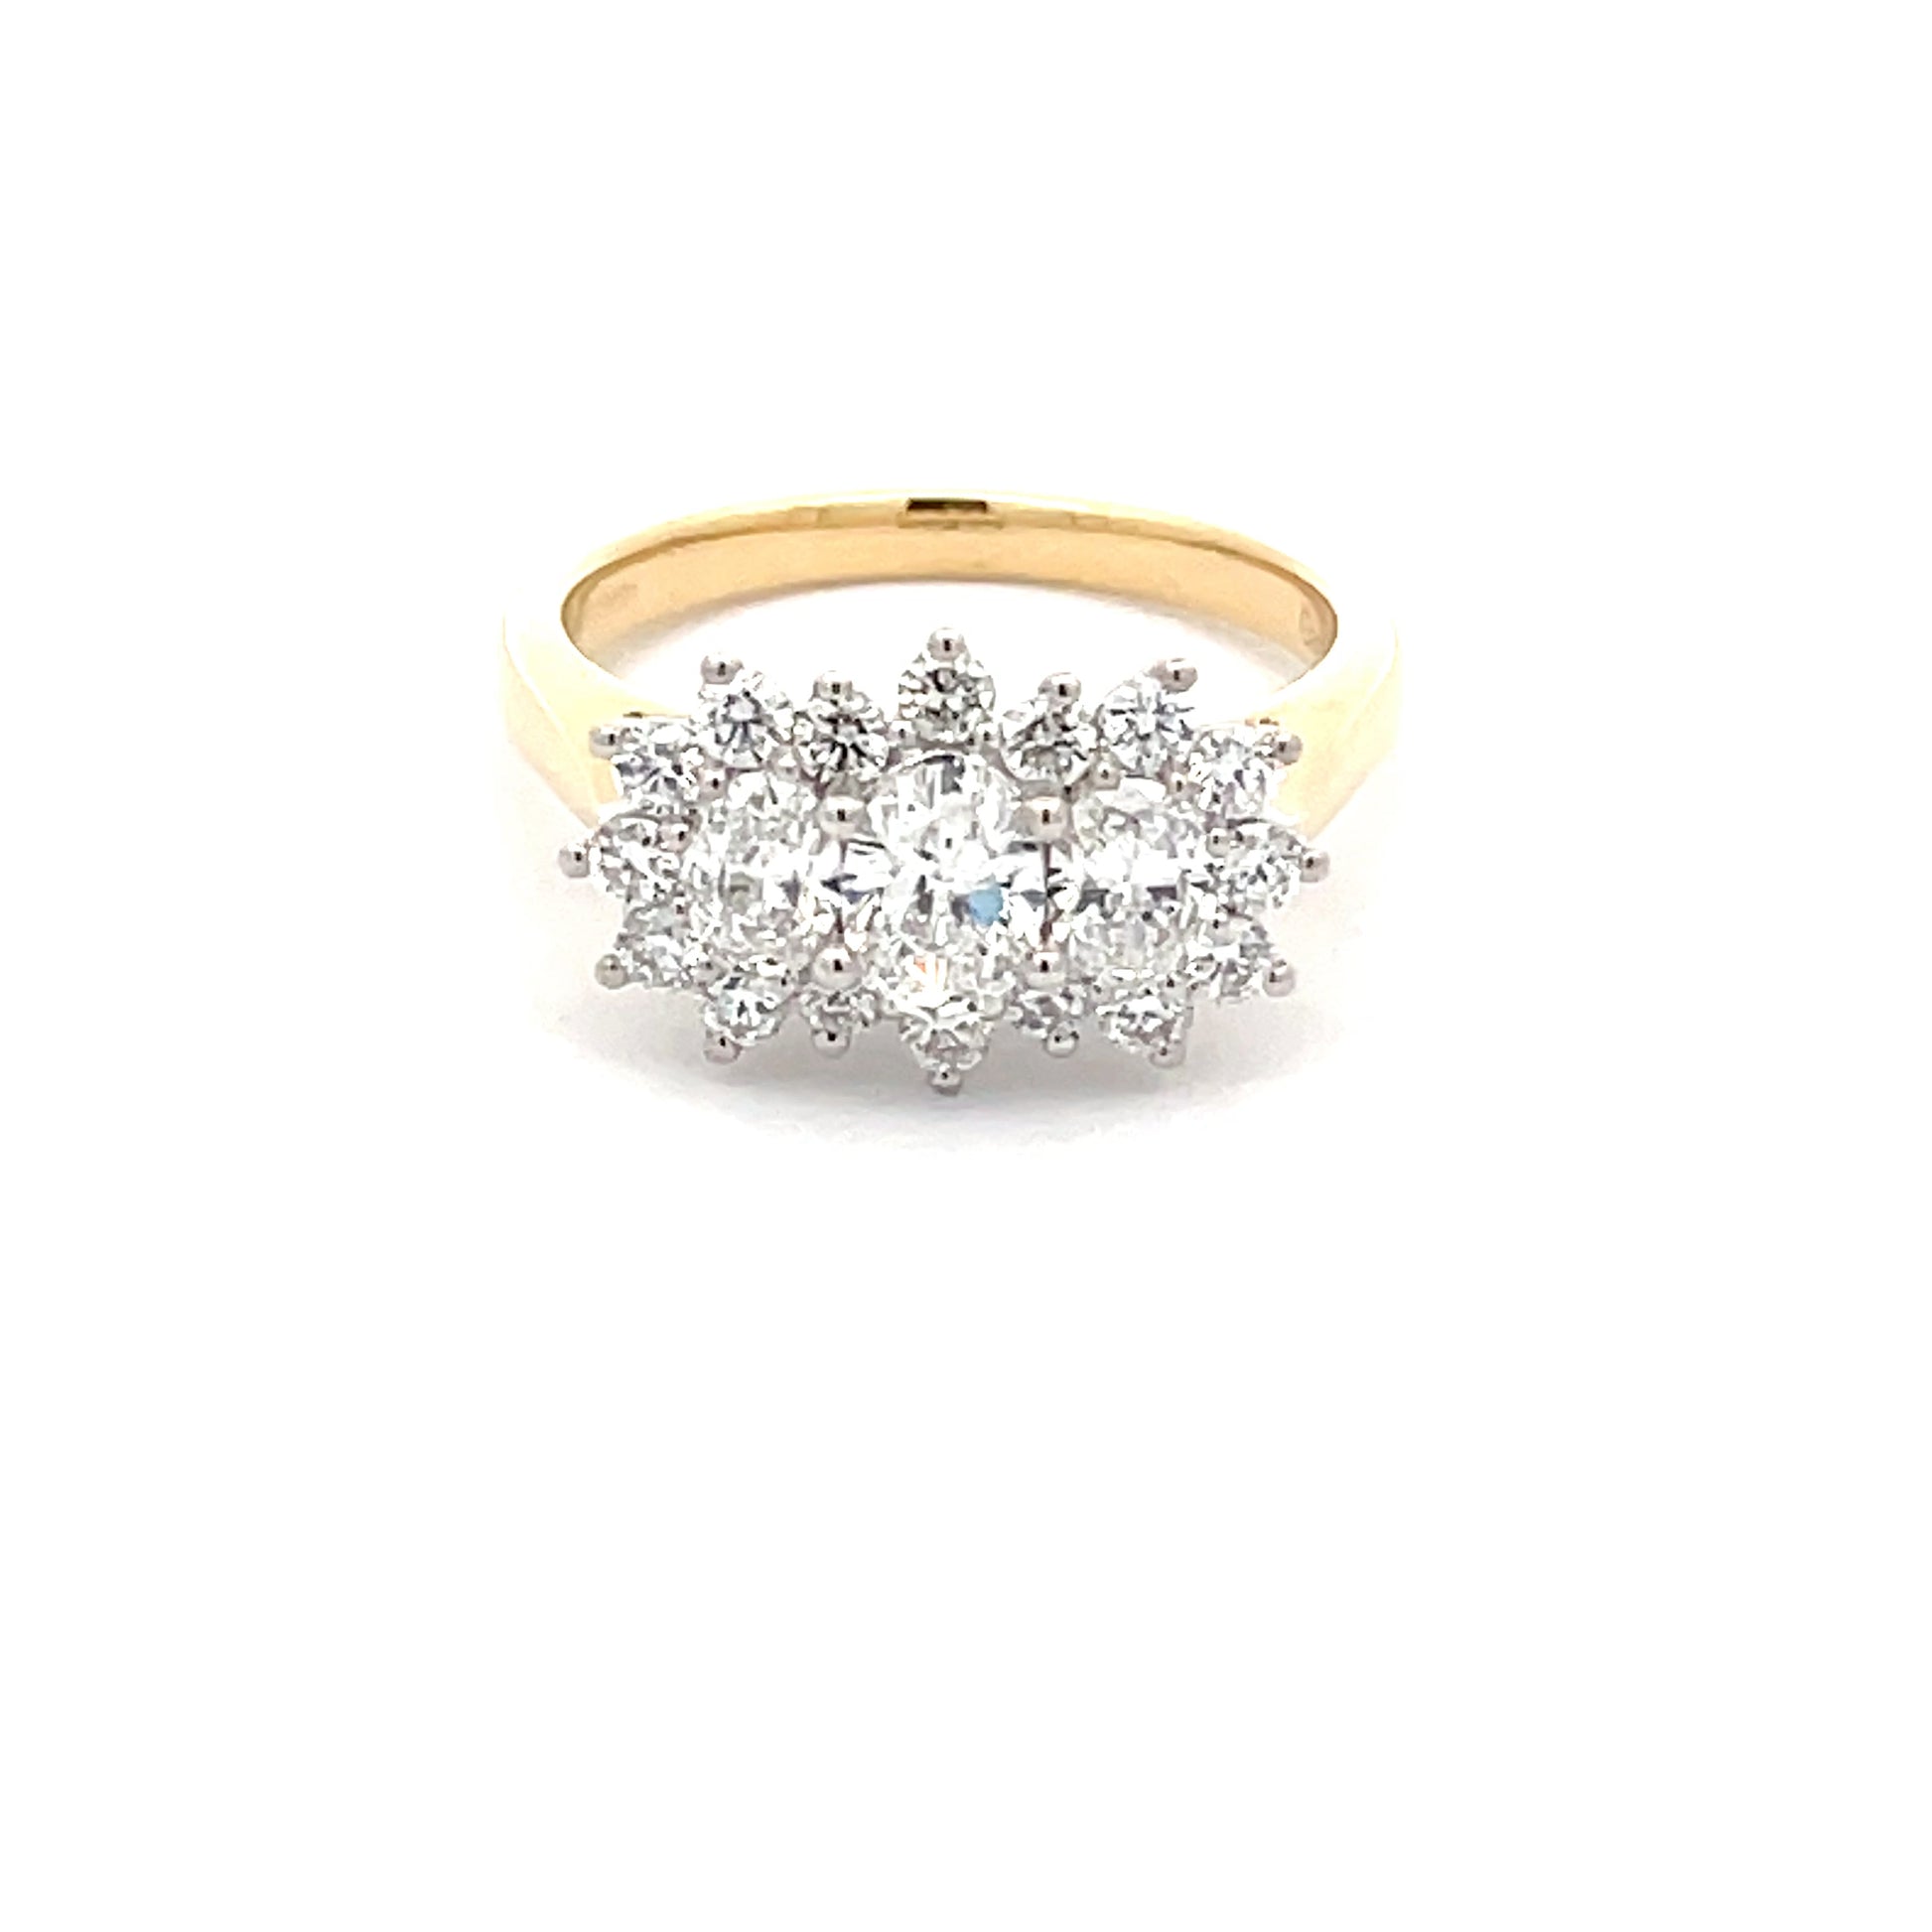 3 Oval Shaped Diamond Cluster Style Ring - 1.28cts  Gardiner Brothers   